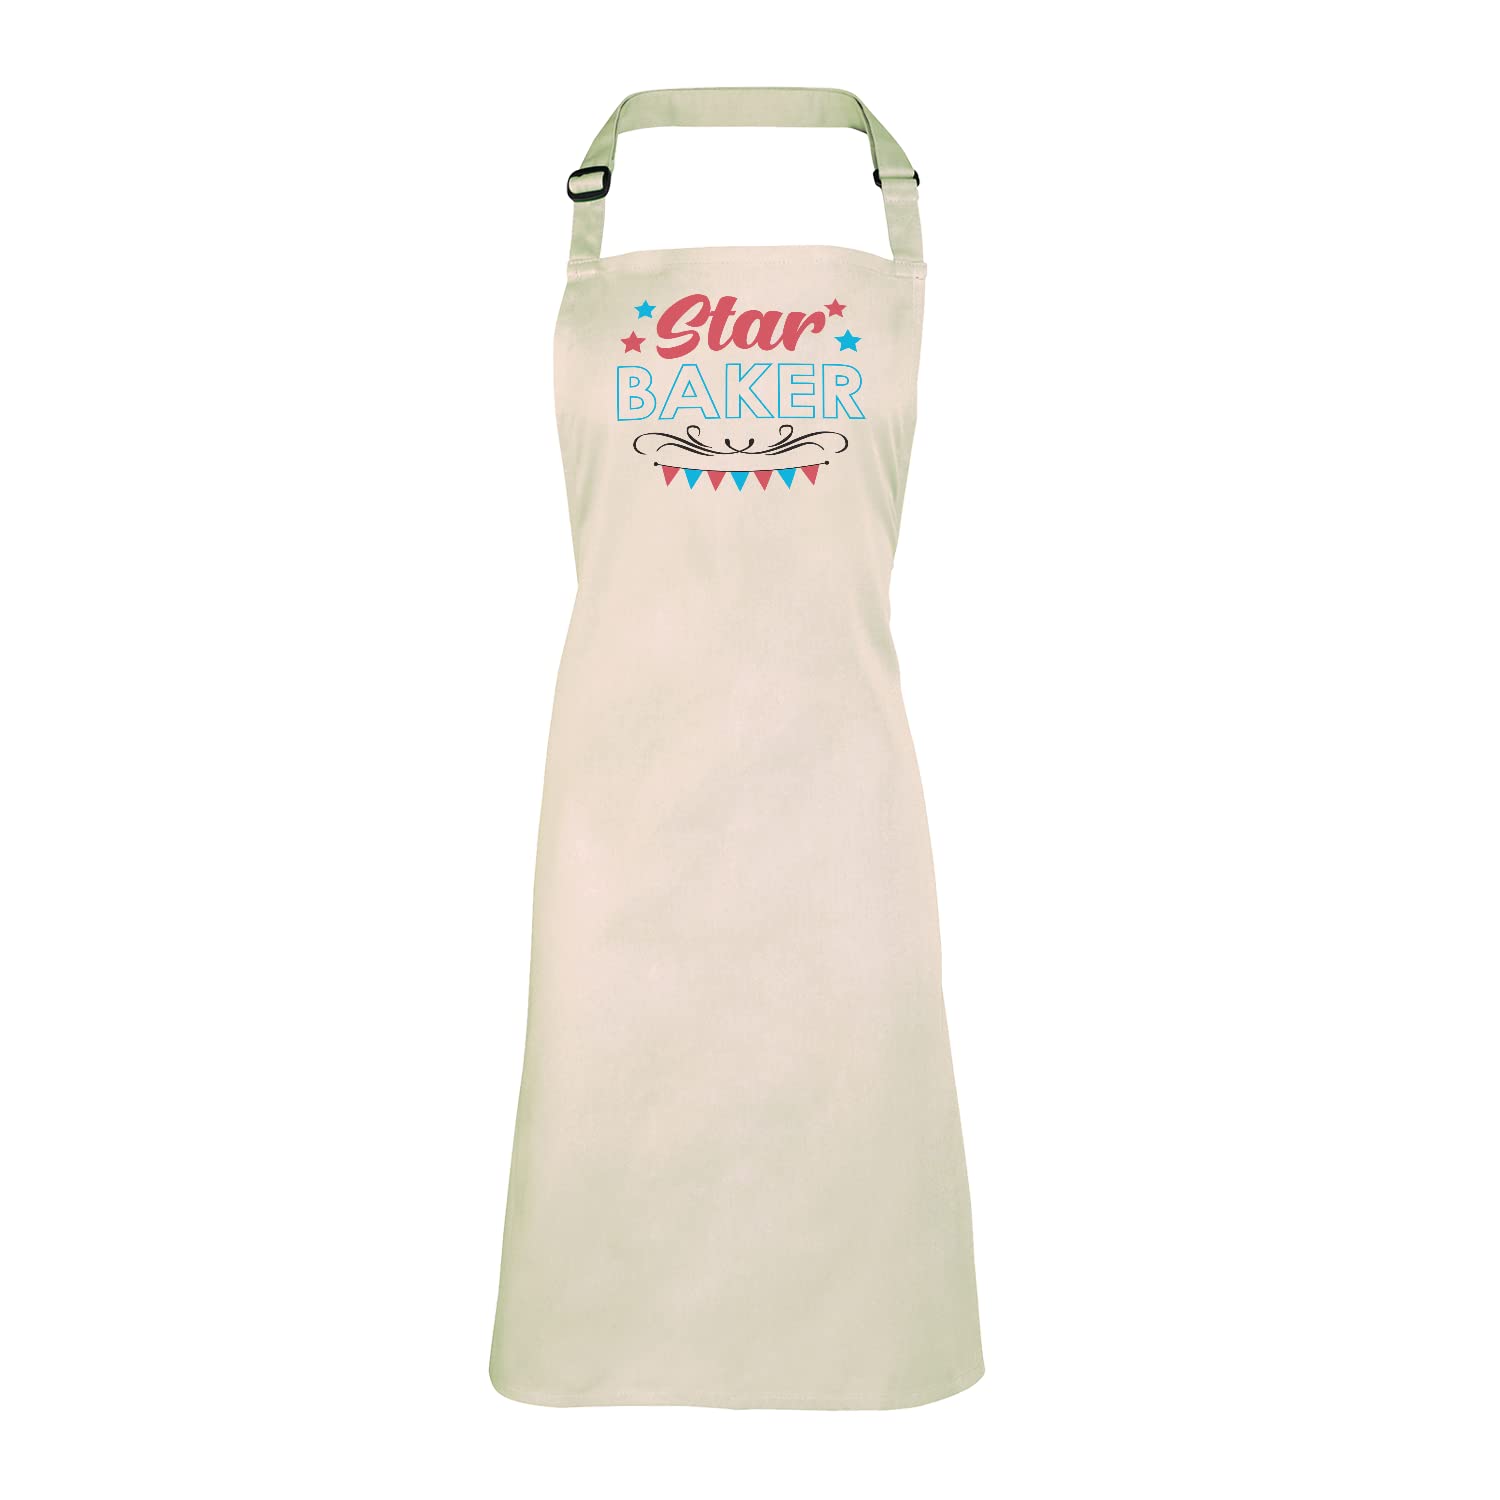 GBBO Star Baker Apron - Bake Off Fan Inspired Funny Baking Star Baker Cooking Gifts Presents Idea Women Men Birthday Christmas Novelty Kitchen Accessories